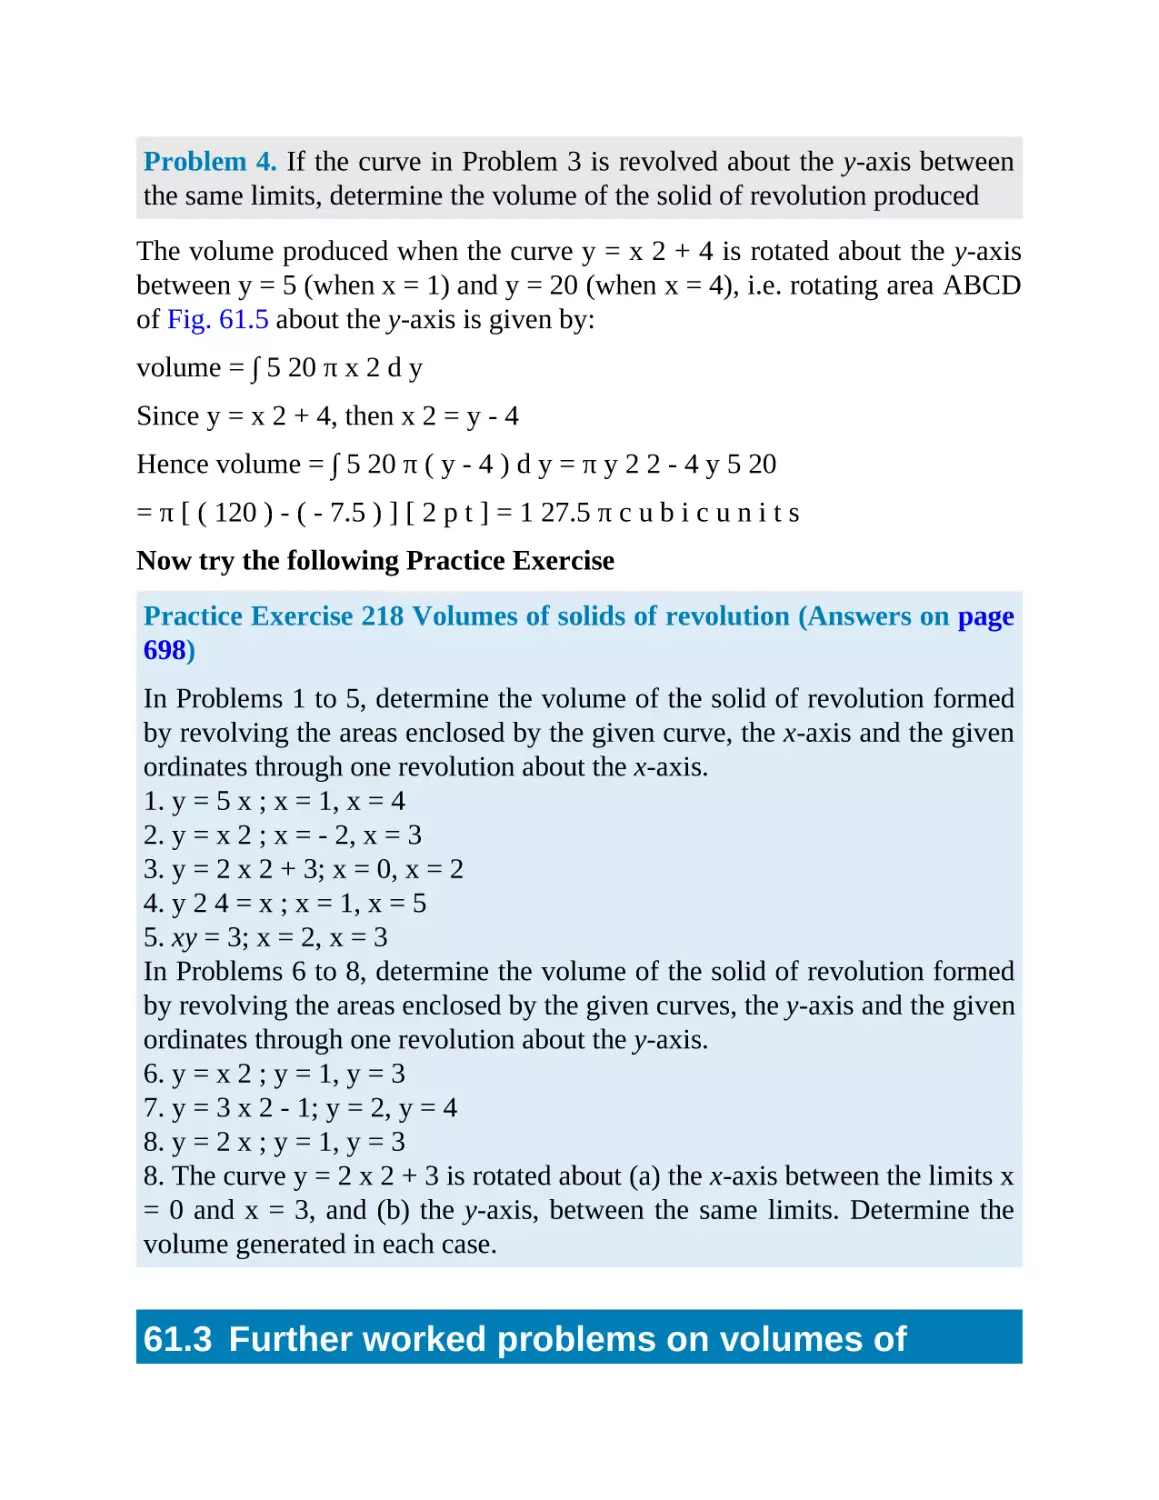 61.3 Further worked problems on volumes of solids of revolution